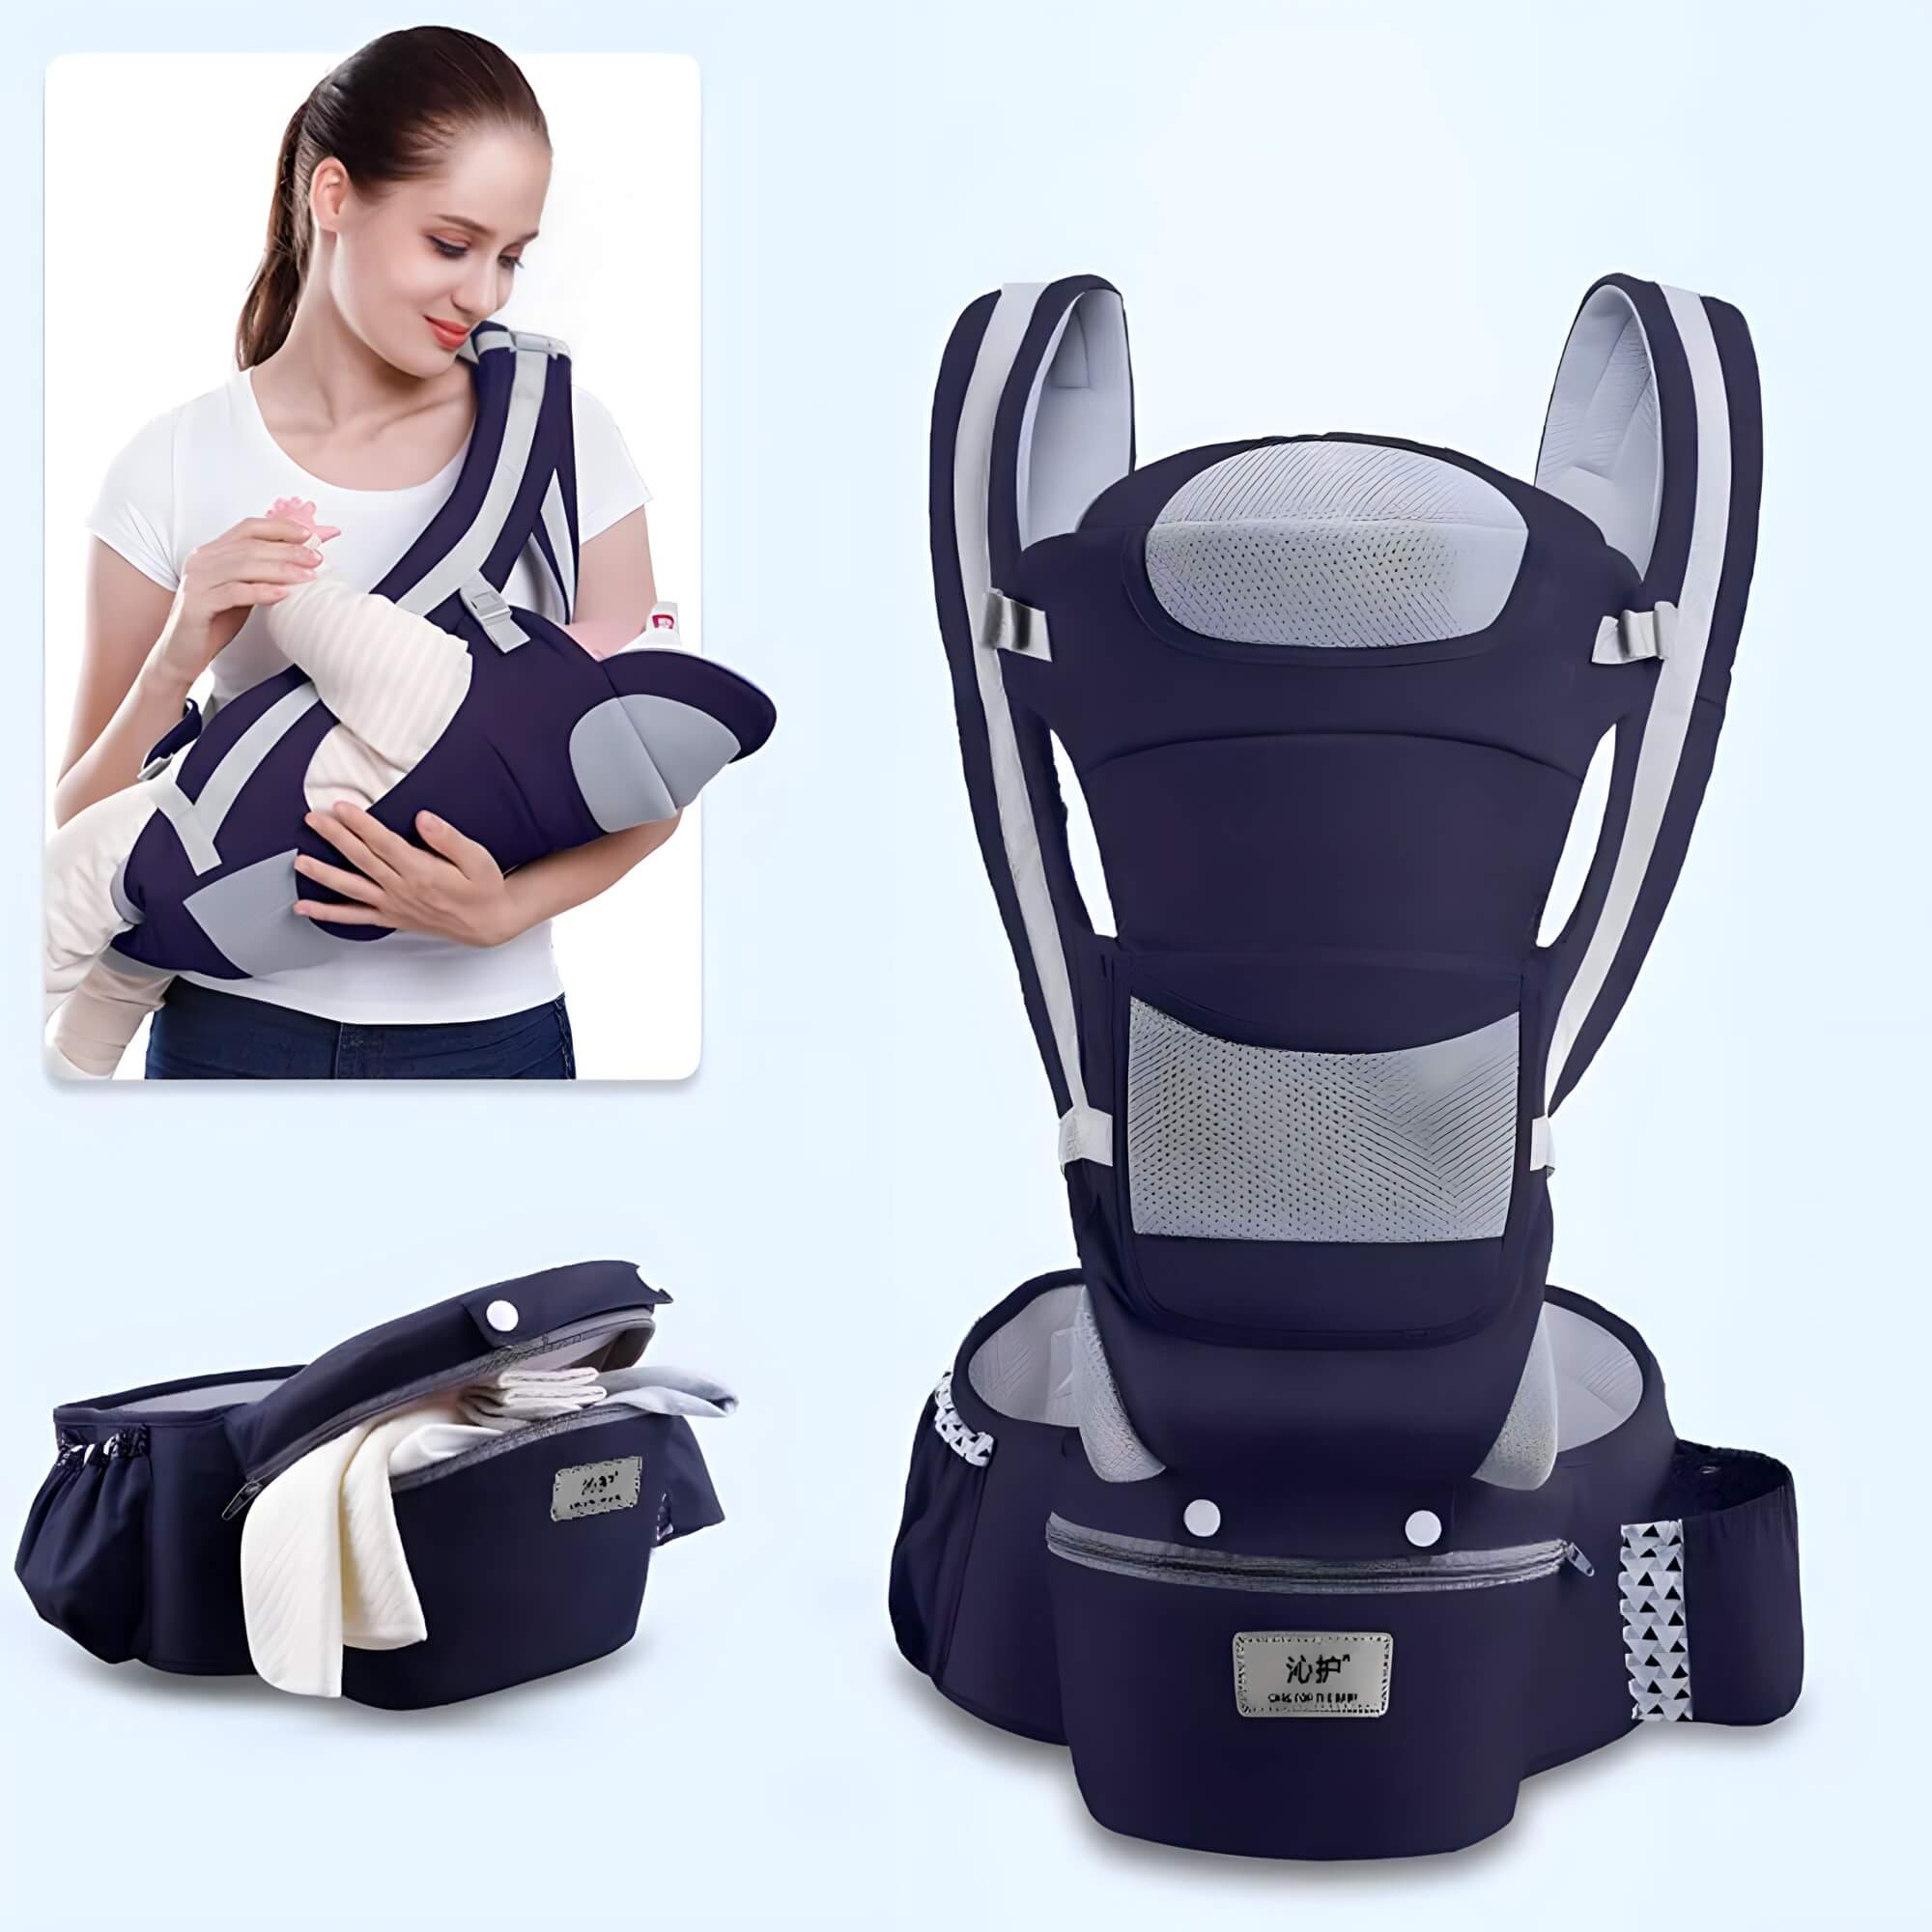 Rockaroo™- The Ultimate 15-in-1 Baby Carrier